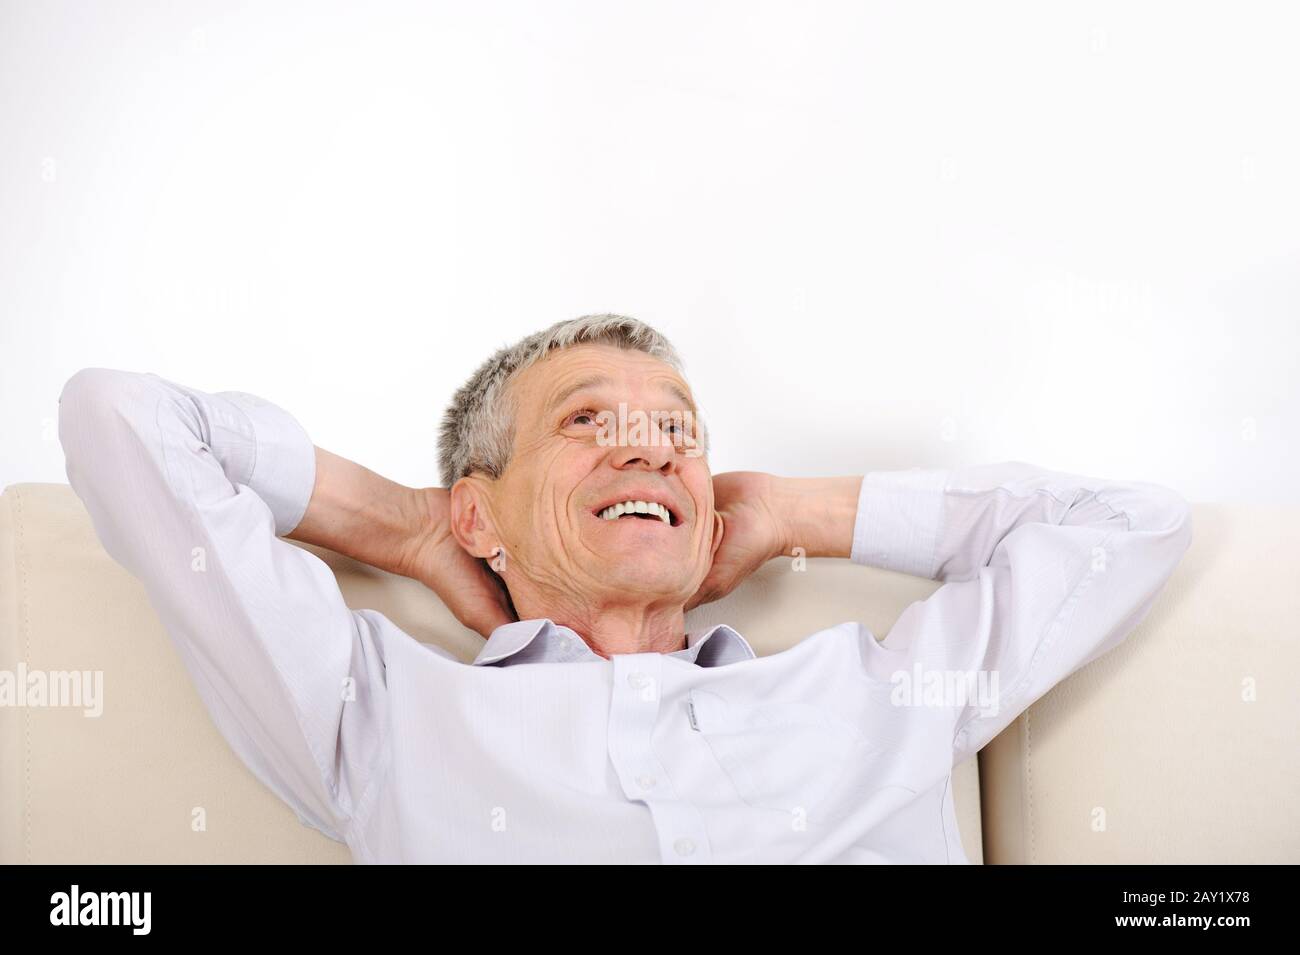 Happy relaxed elderly man at home Stock Photo